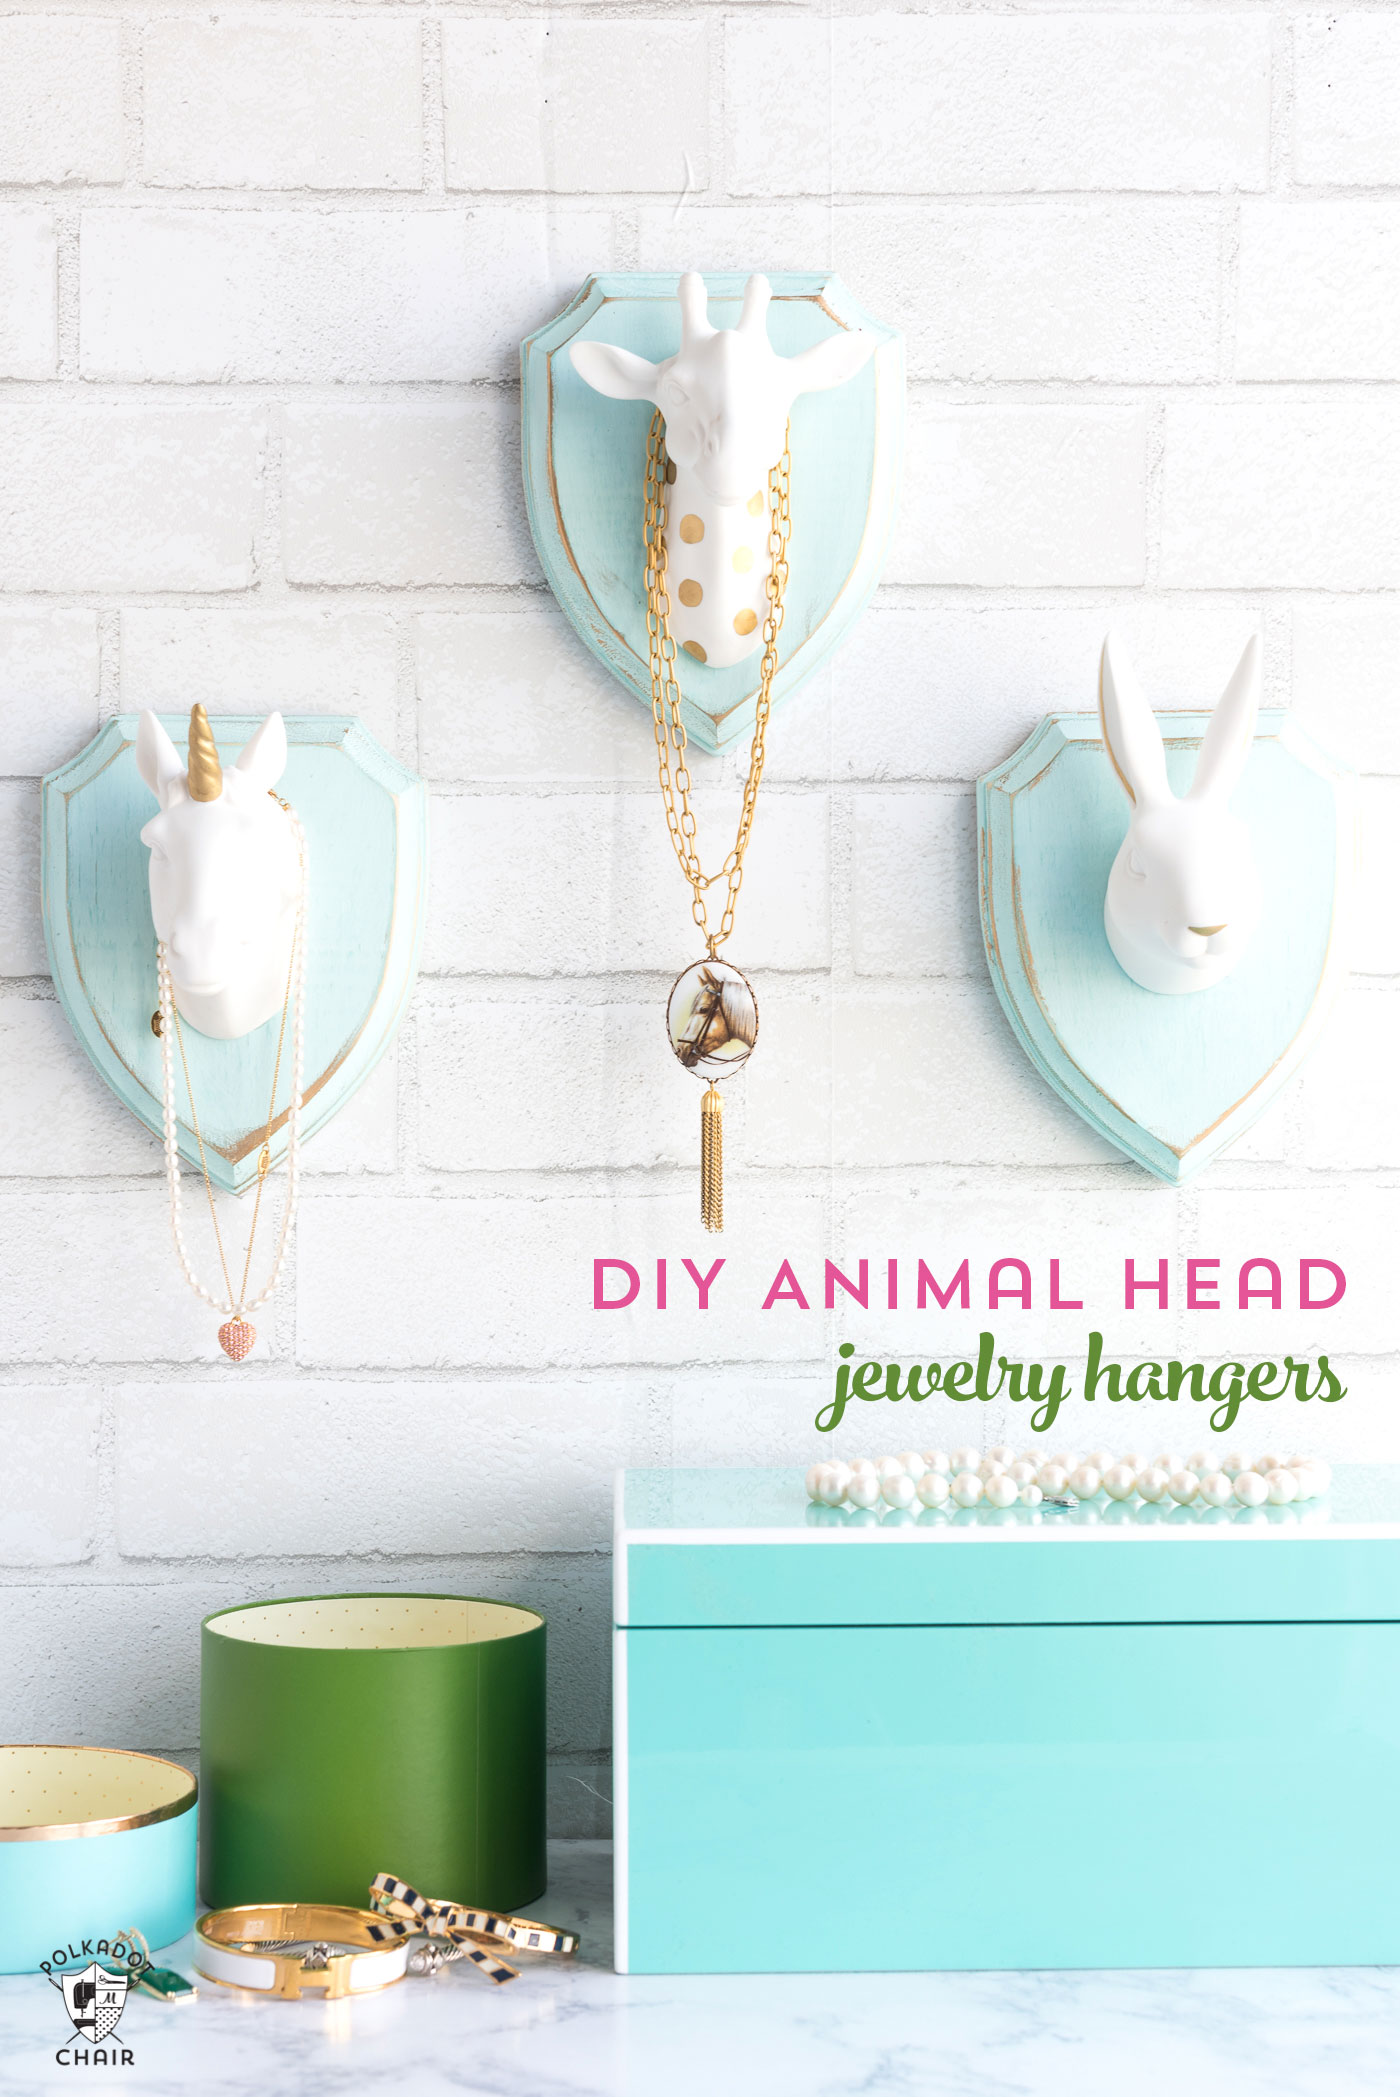 Cute and Whimsical DIY Jewelry Hangers made with wood plaques and animal heads; a creative way to display your jewelry 